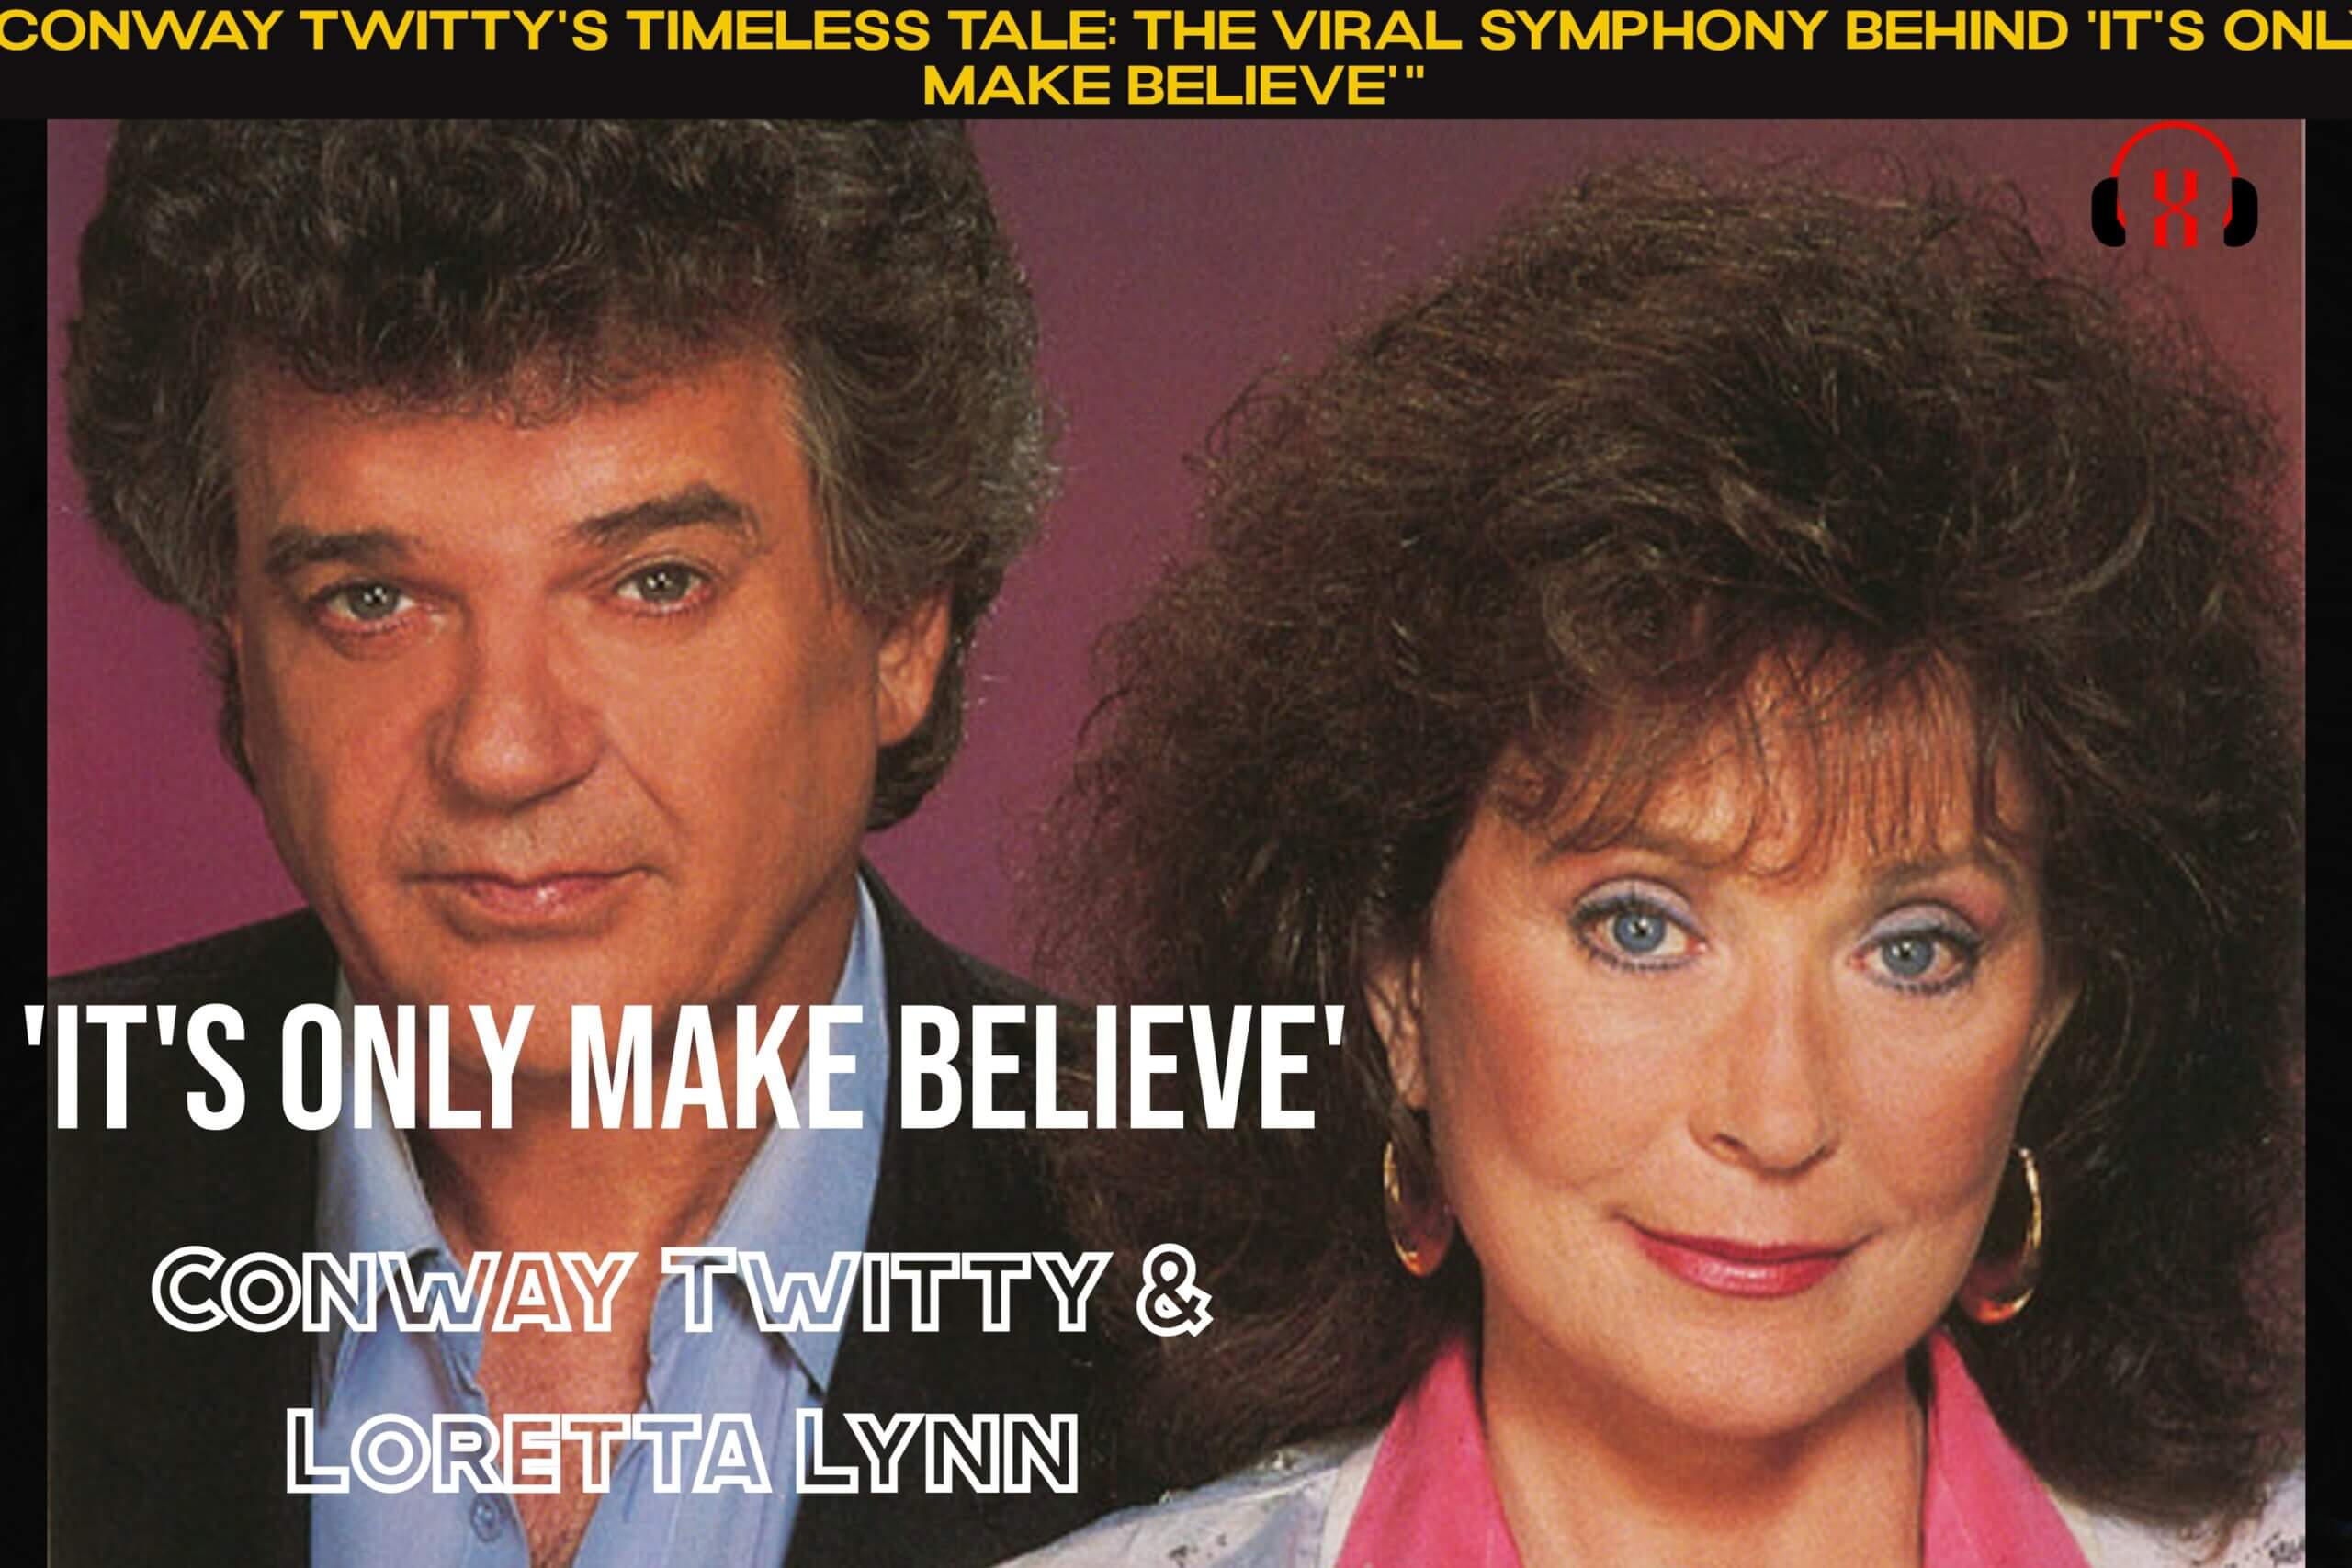 “Conway Twitty’s Timeless Tale: The Viral Symphony Behind ‘It’s Only Make Believe'”